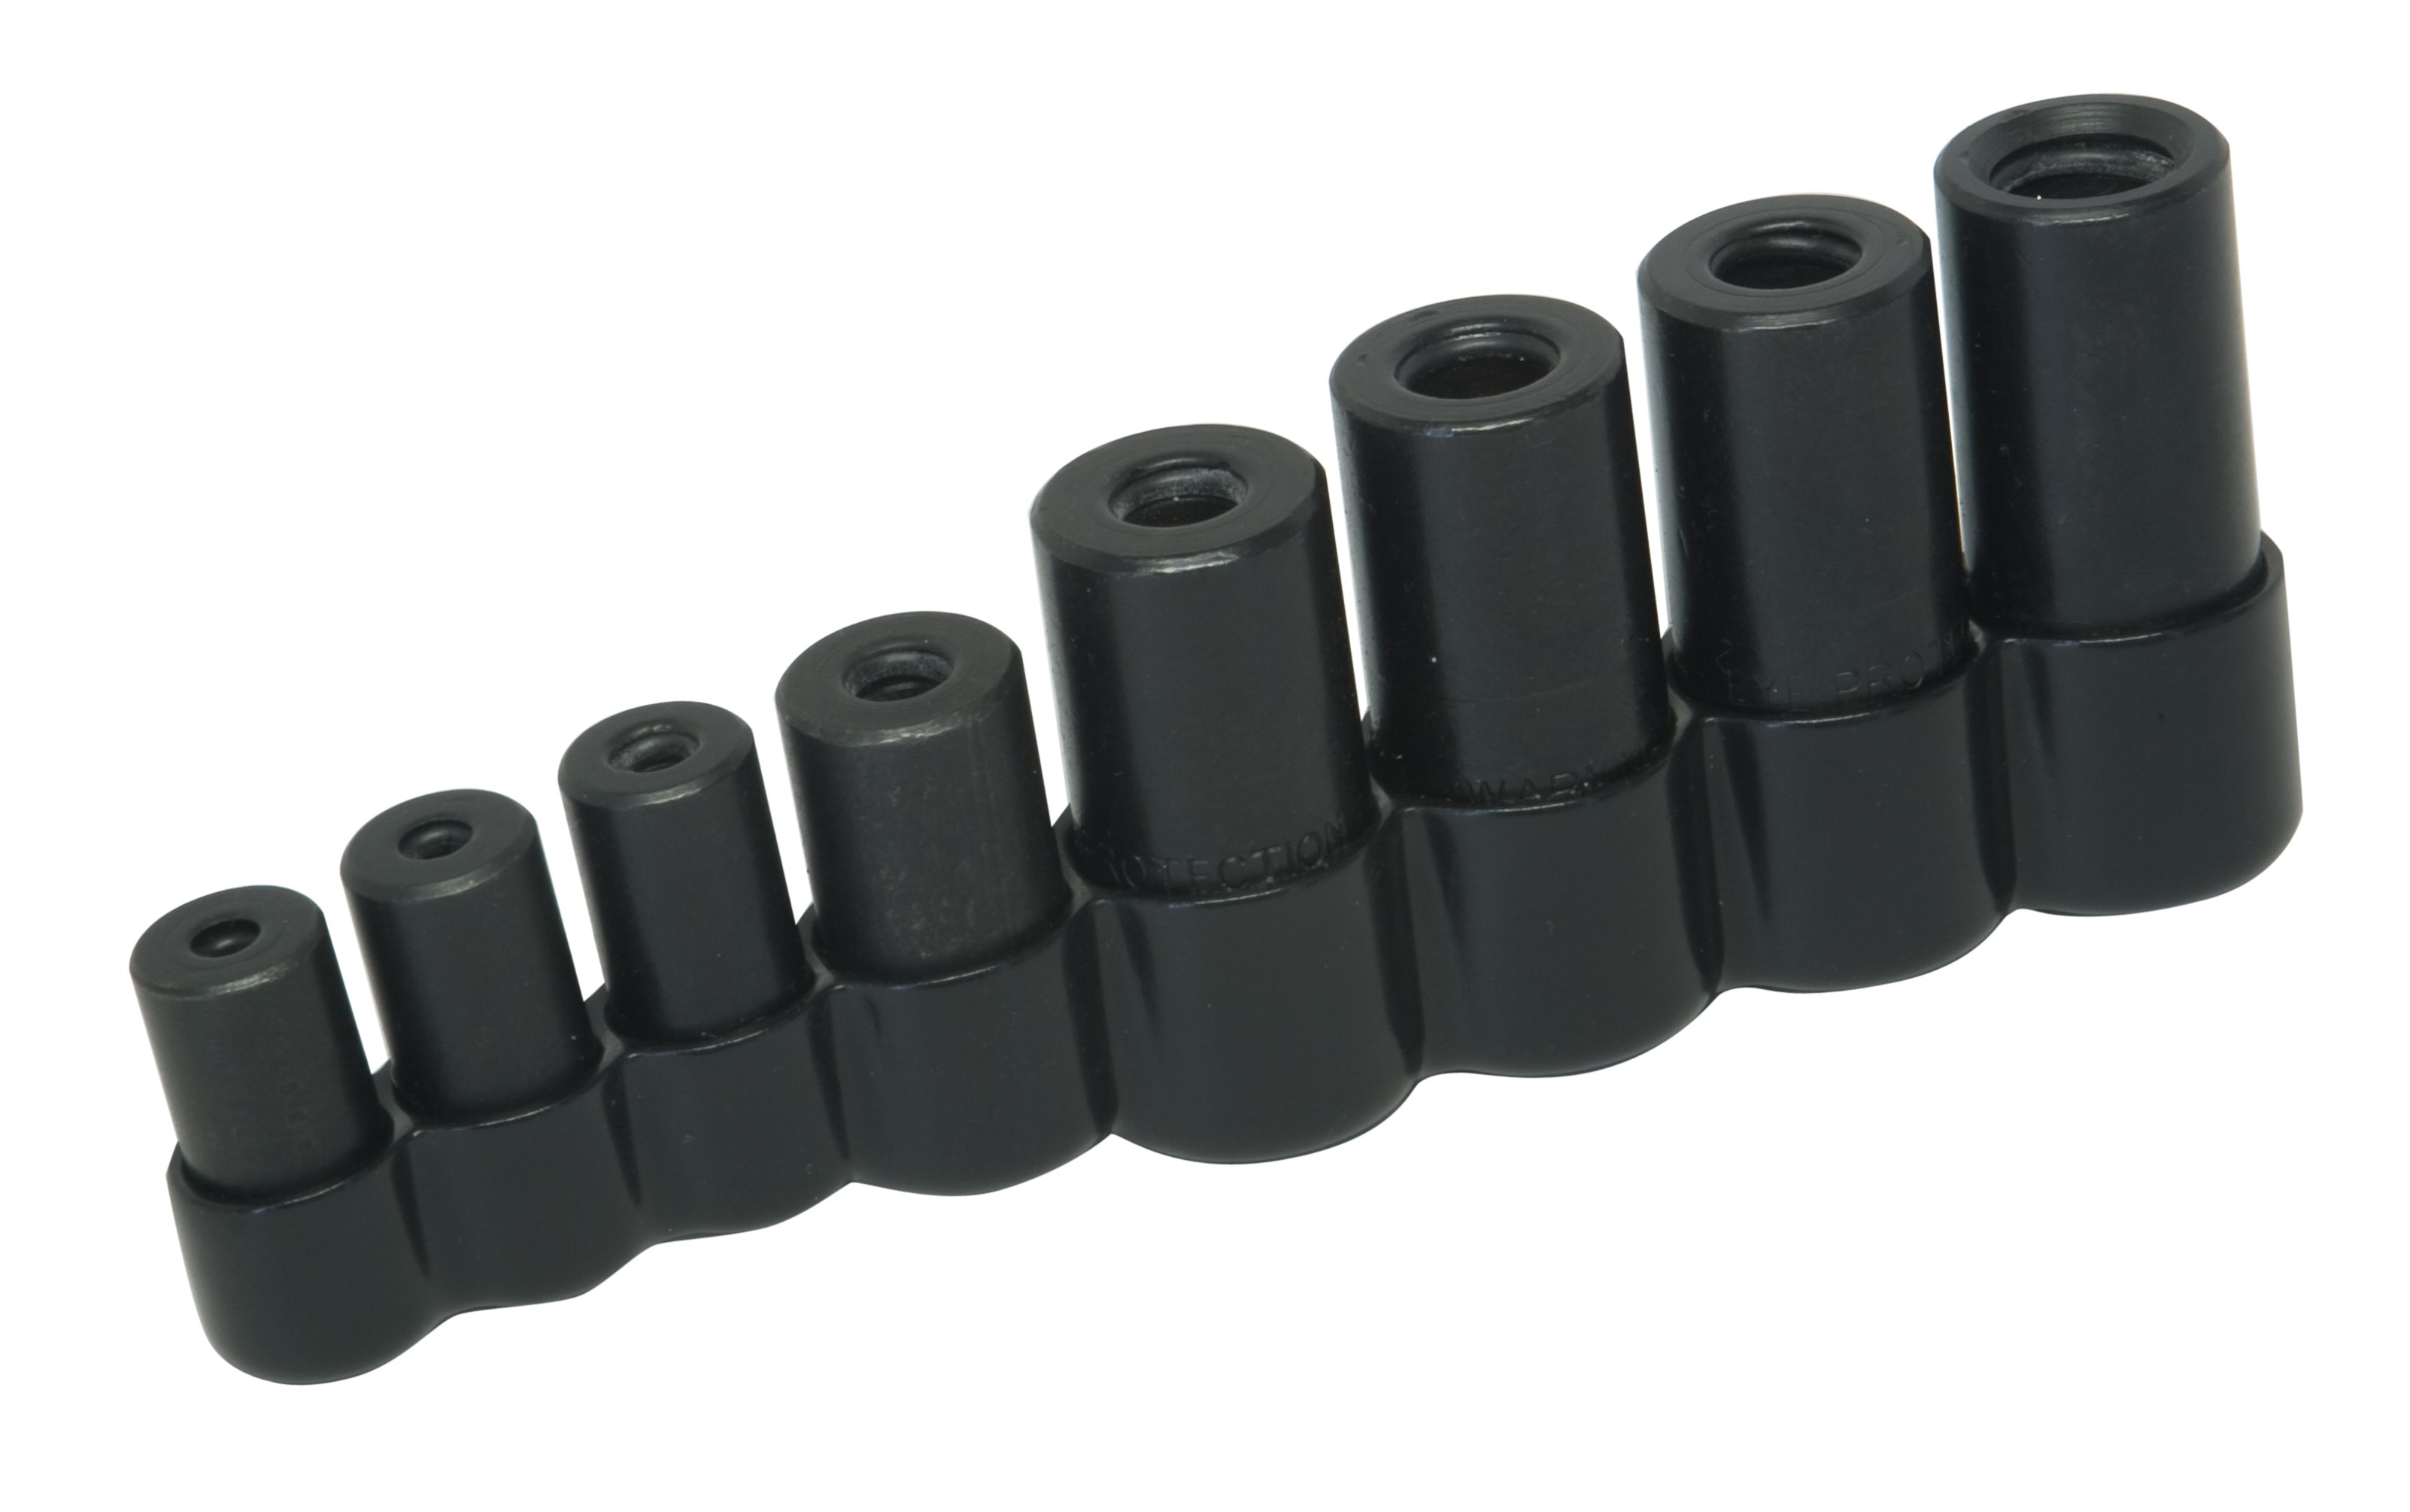 TAP SOCKET SET 70500 Set of 8 Sockets Contains Vinyl Holder Perfect in T Handle 